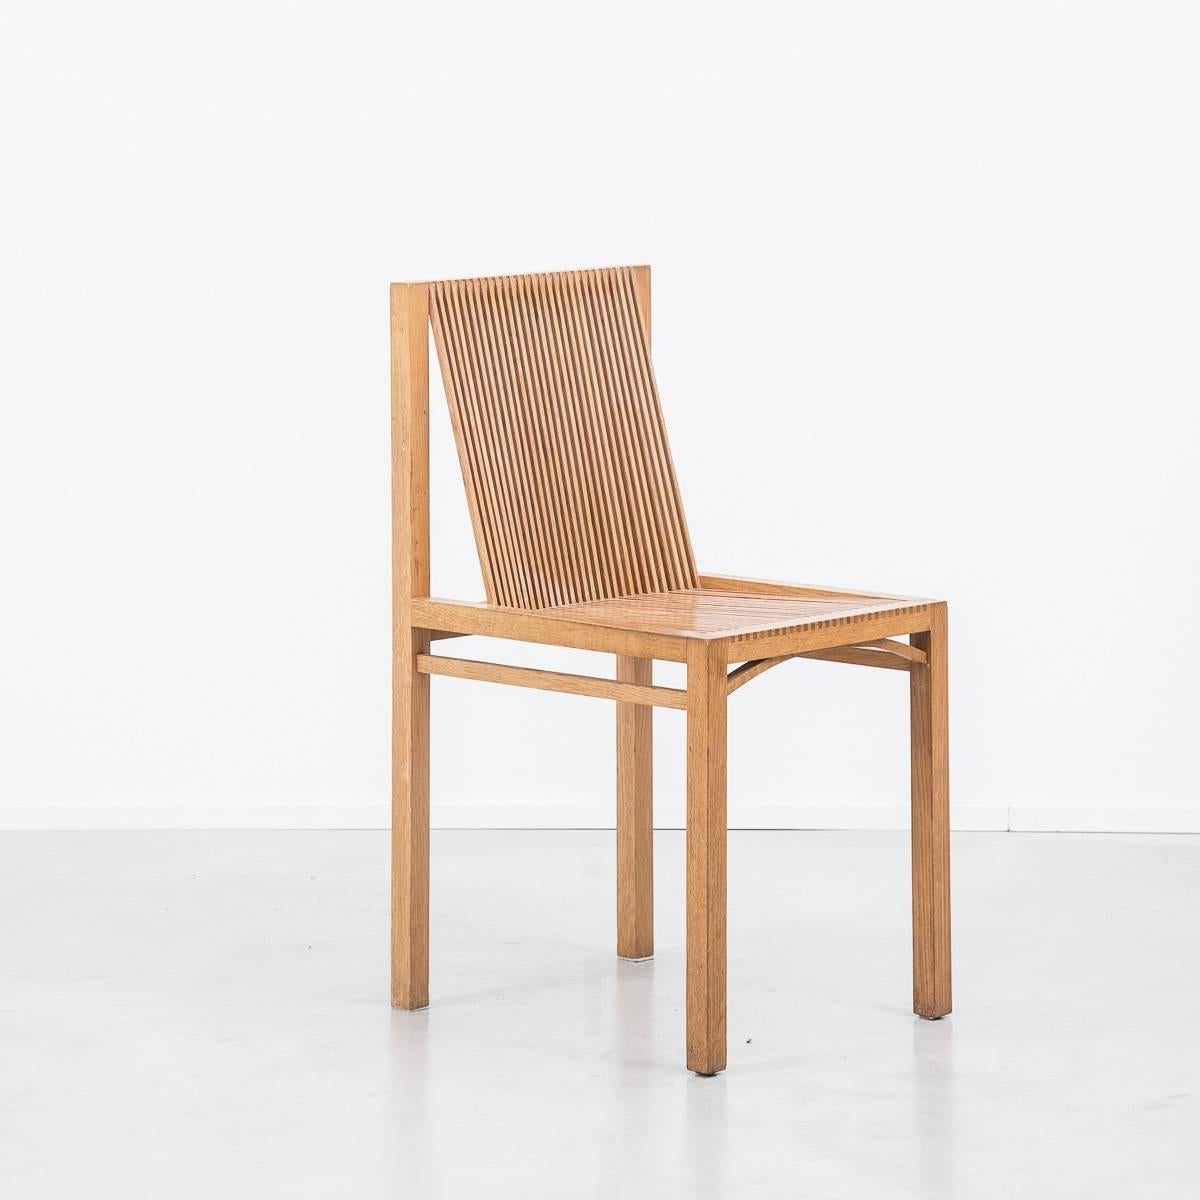 These expertly crafted Latjes chair were designed by Dutch designer Ruud Jan Kokke. His working style is associated with that of traditions set by Gerrit Rietveld in that he heavily prototypes each design in his workshop. Kokke has designed for